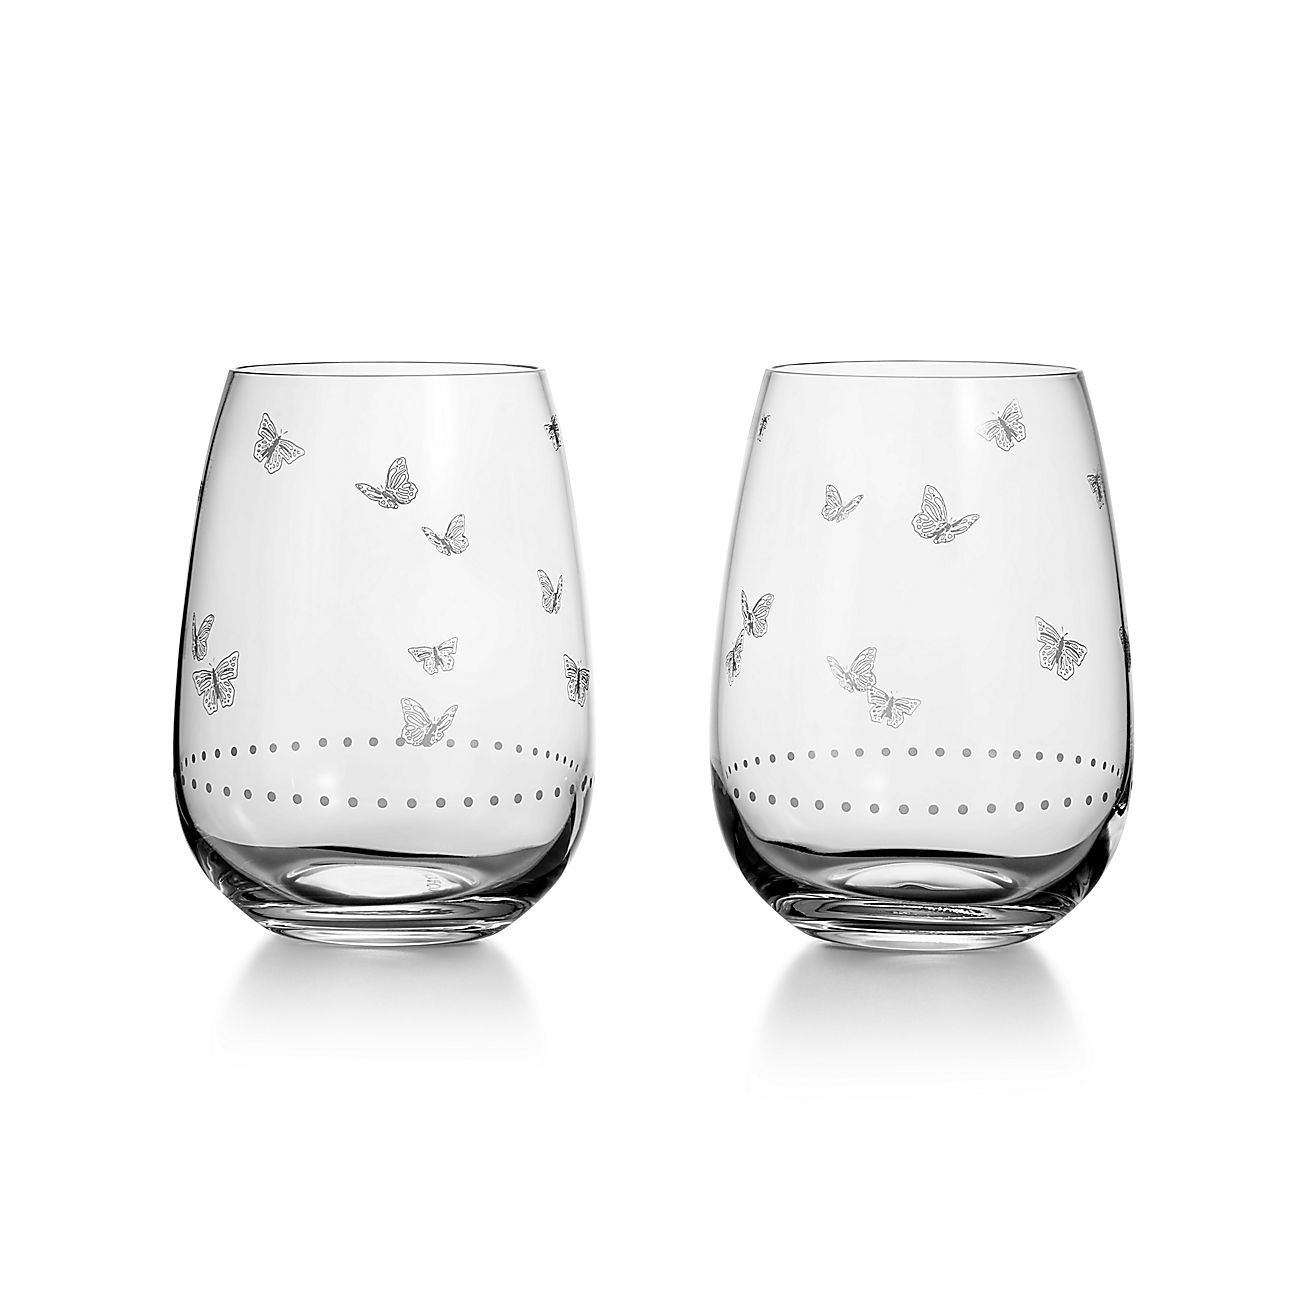 Tiffany Audubon Stemless White Wine Glasses in Etched Glass, Set of Two